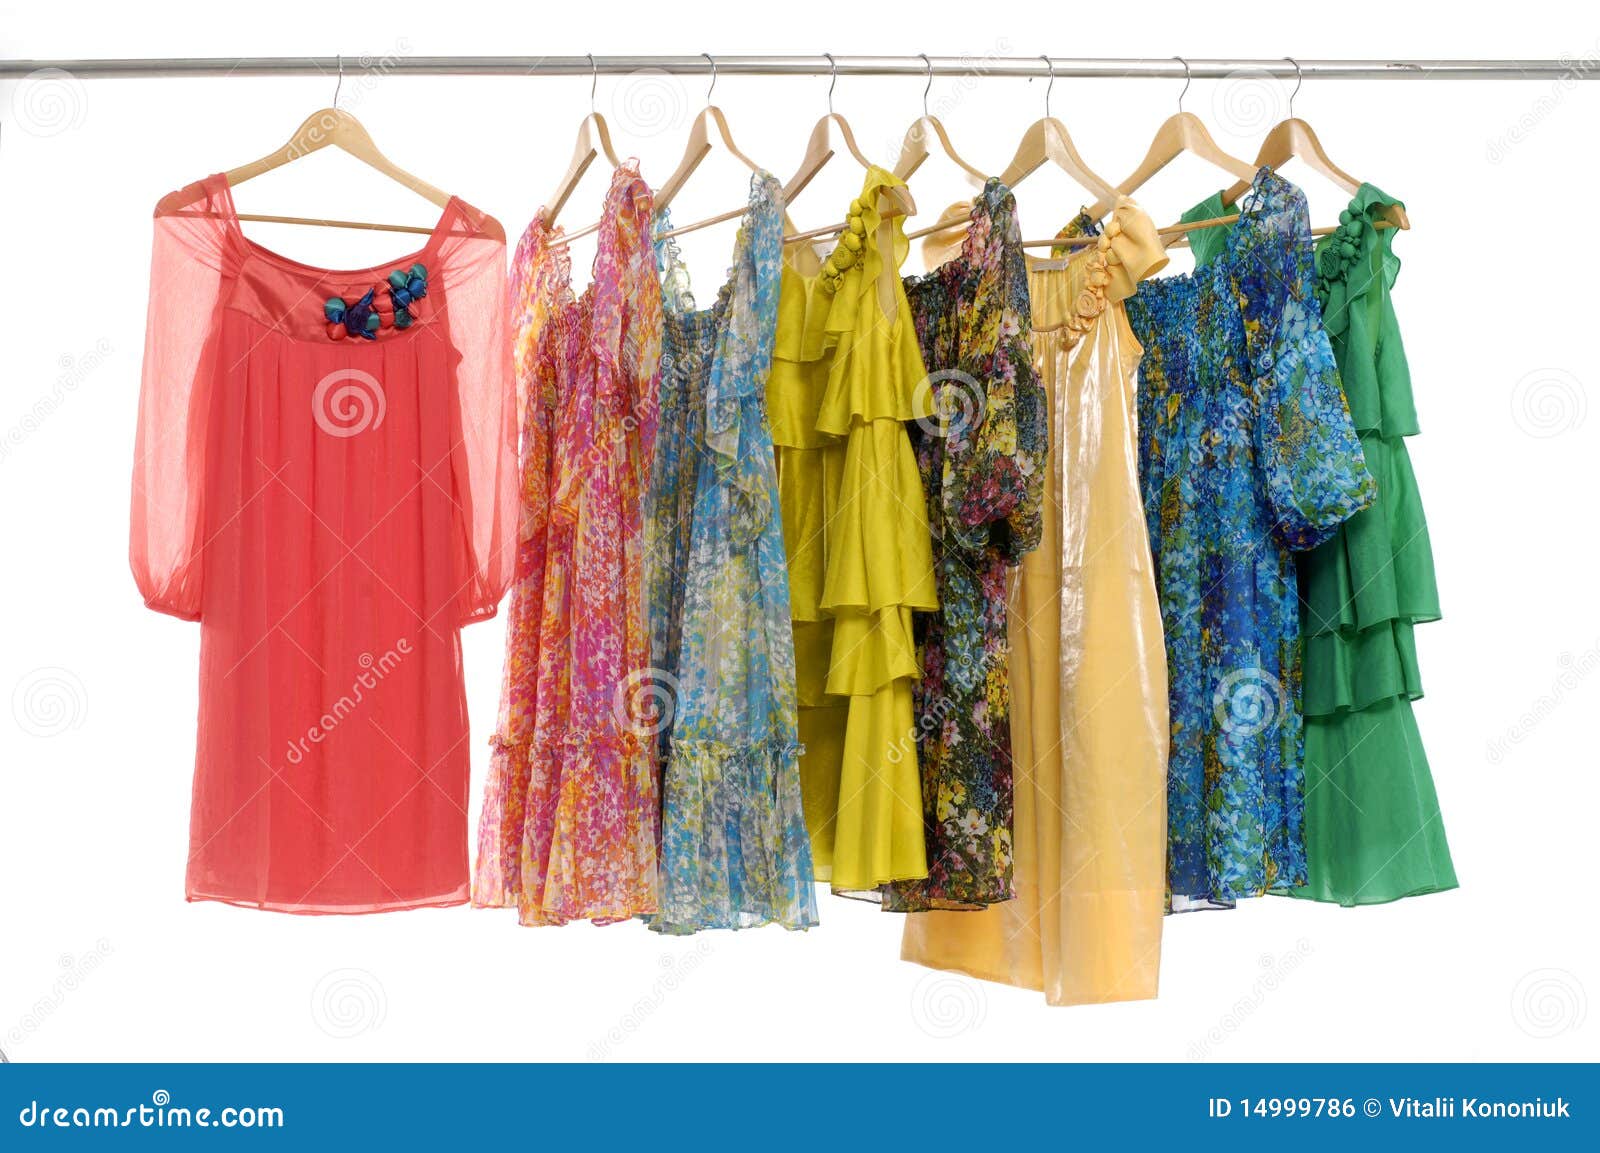 clipart of clothes hanging in a closet - photo #41